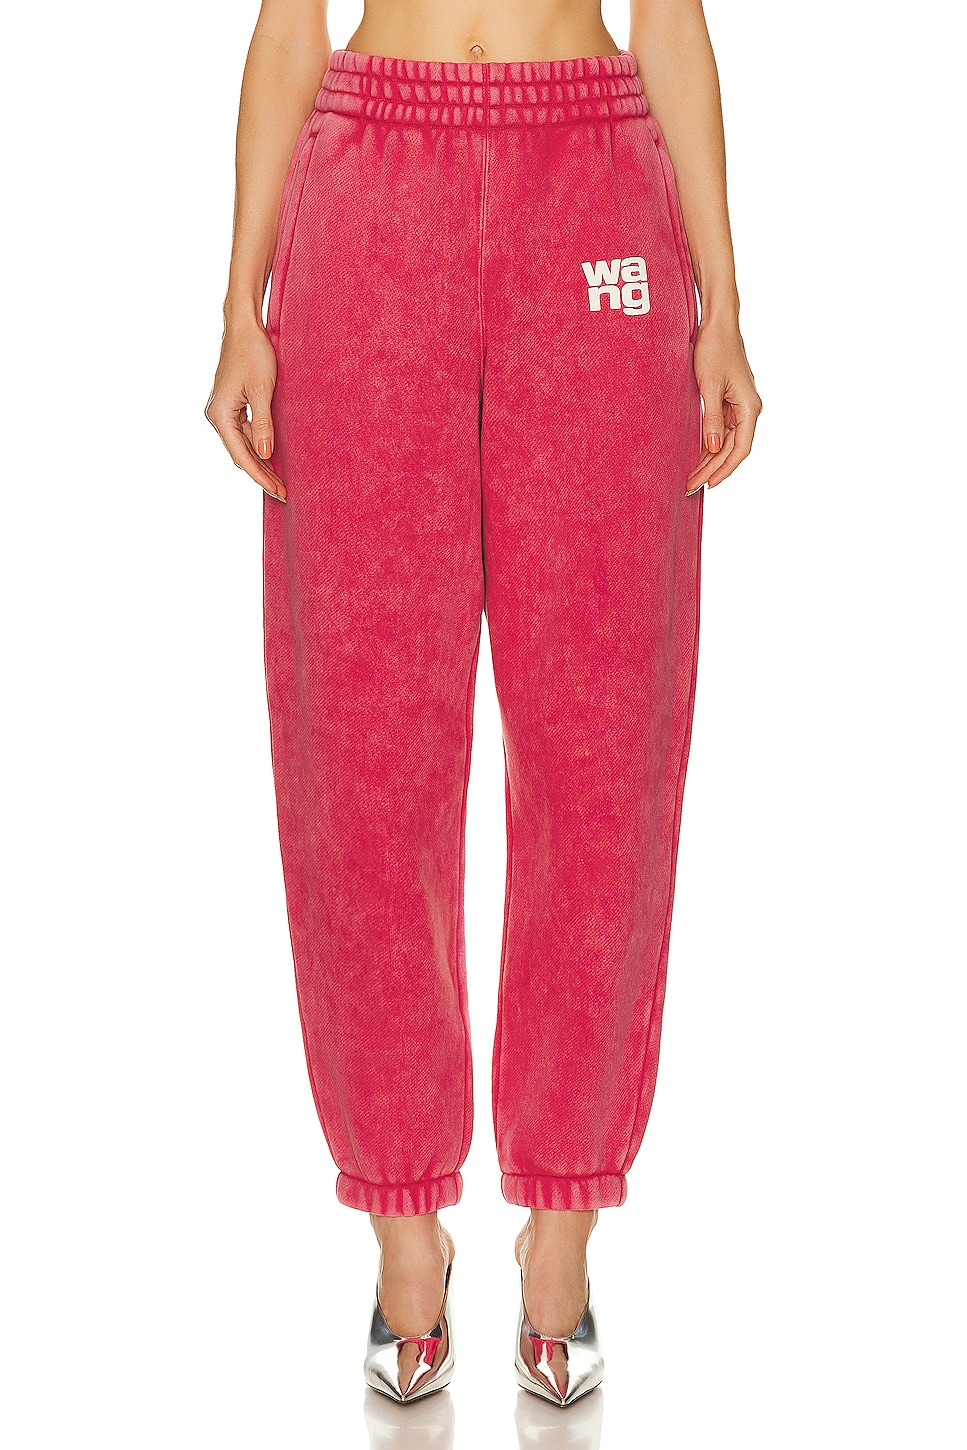 Image 1 of Alexander Wang Essentials Terry Classic Sweatpant in Soft Cherry